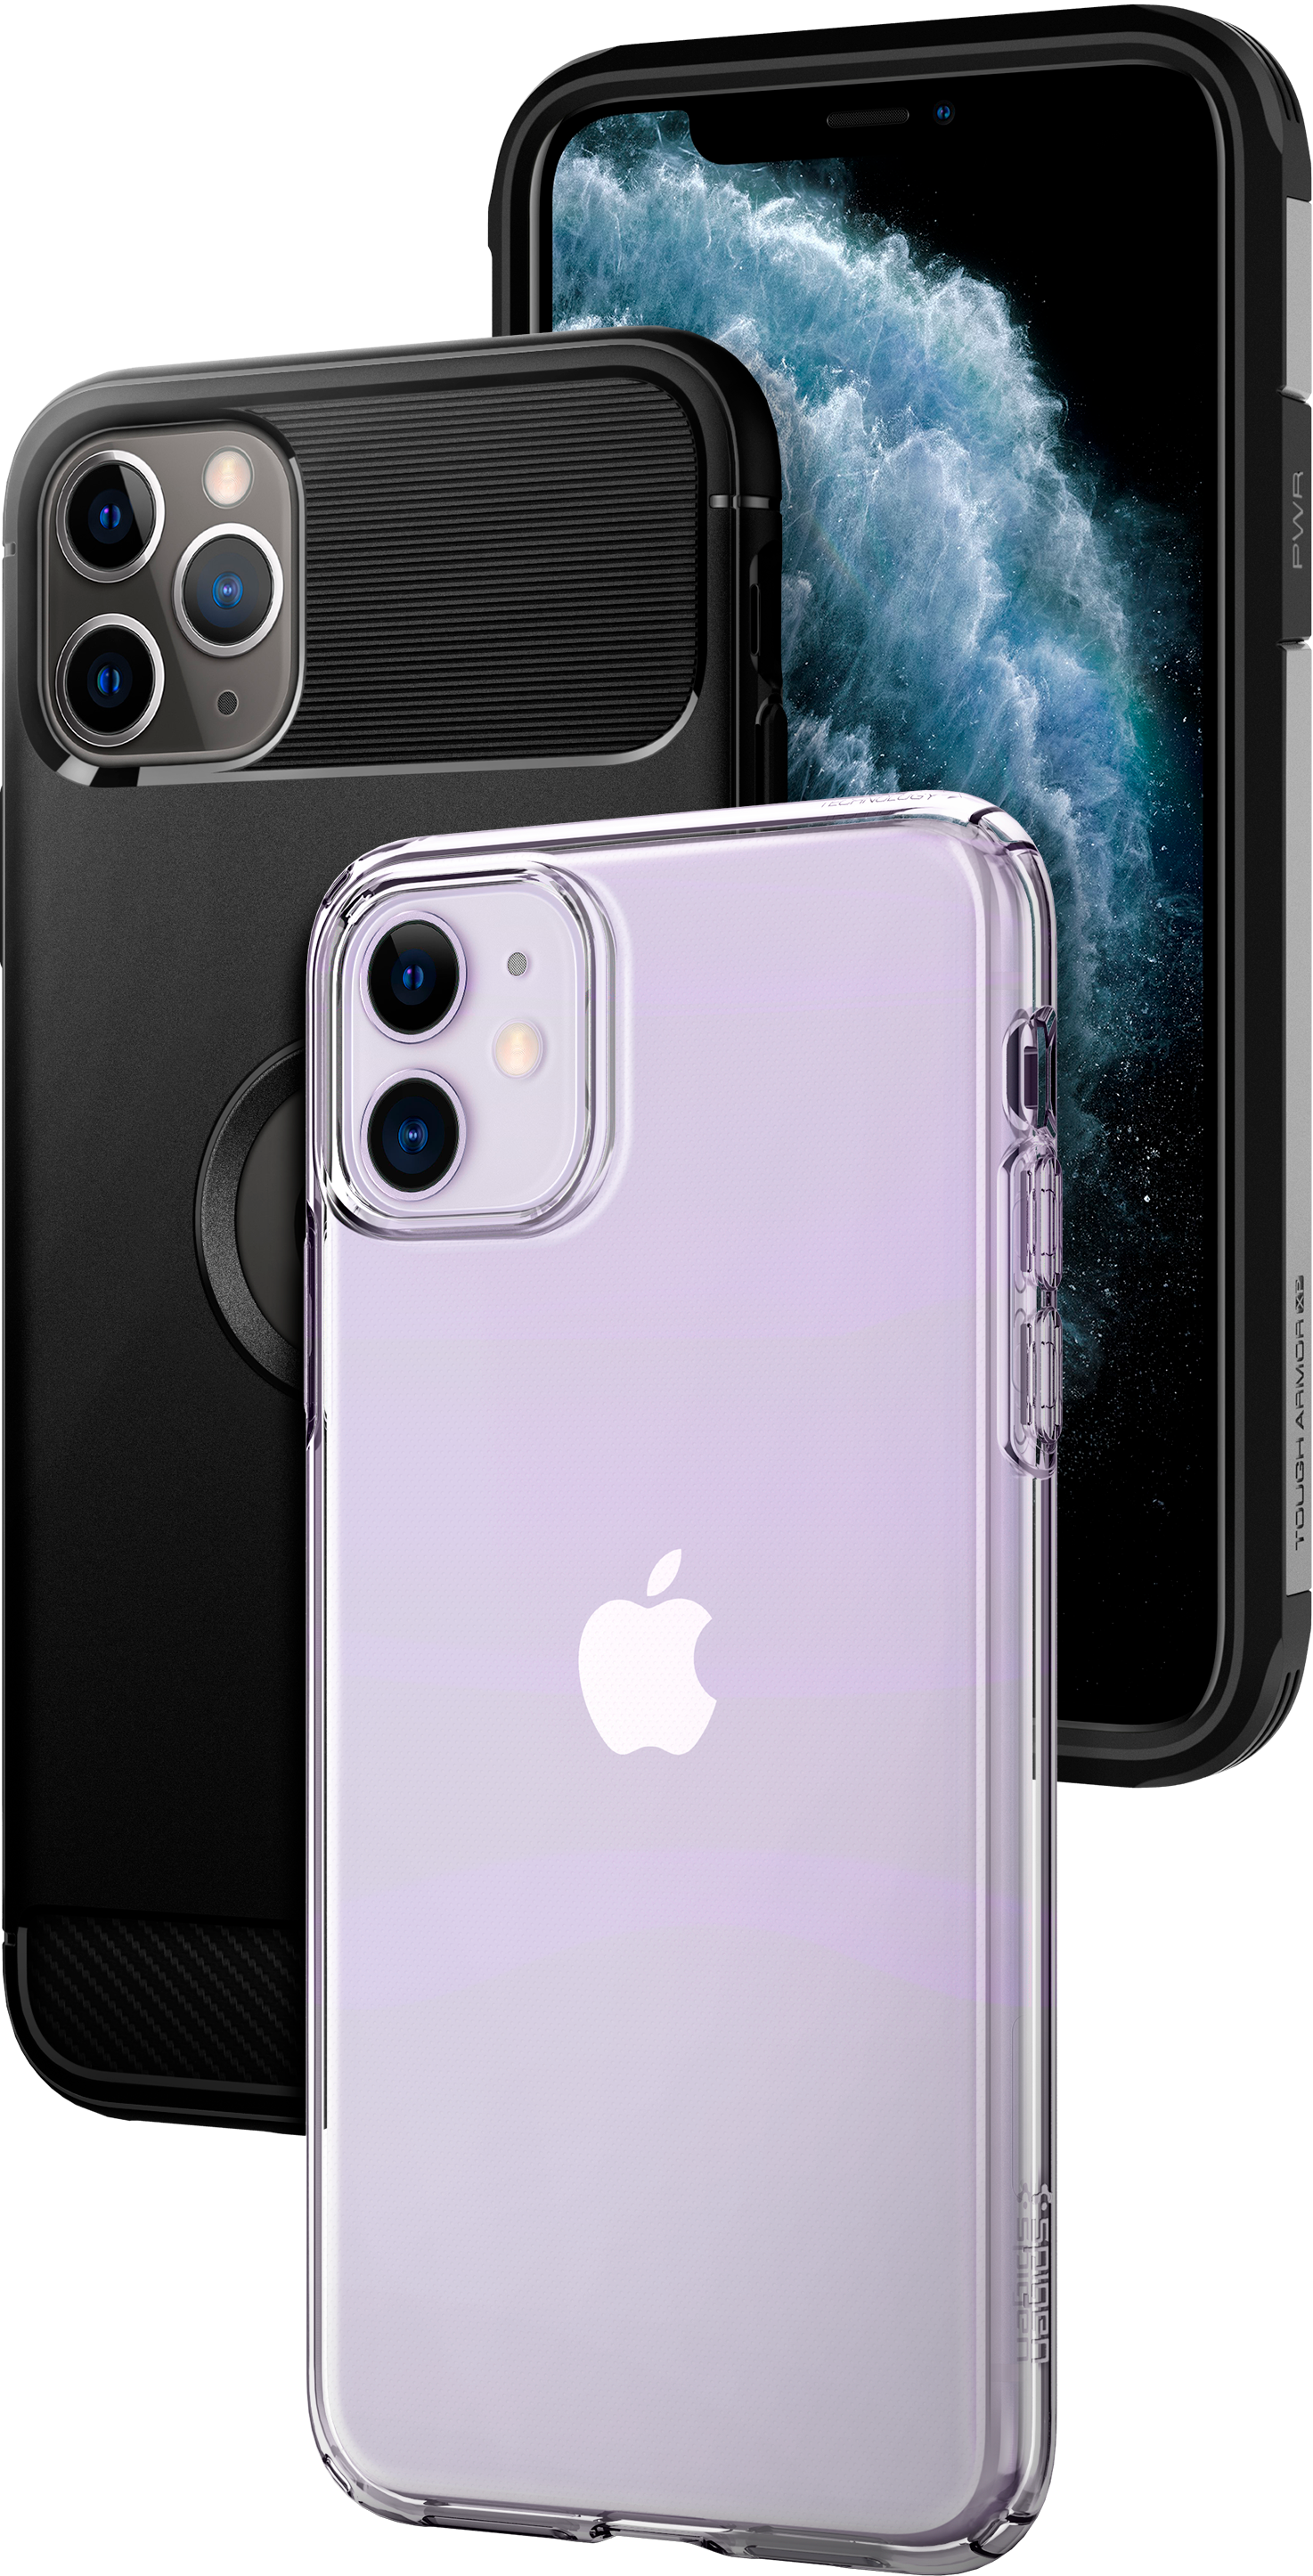 Iphone 11 Case Template Png Download Transparent Iphone Template Png For Free On Pngkey Com